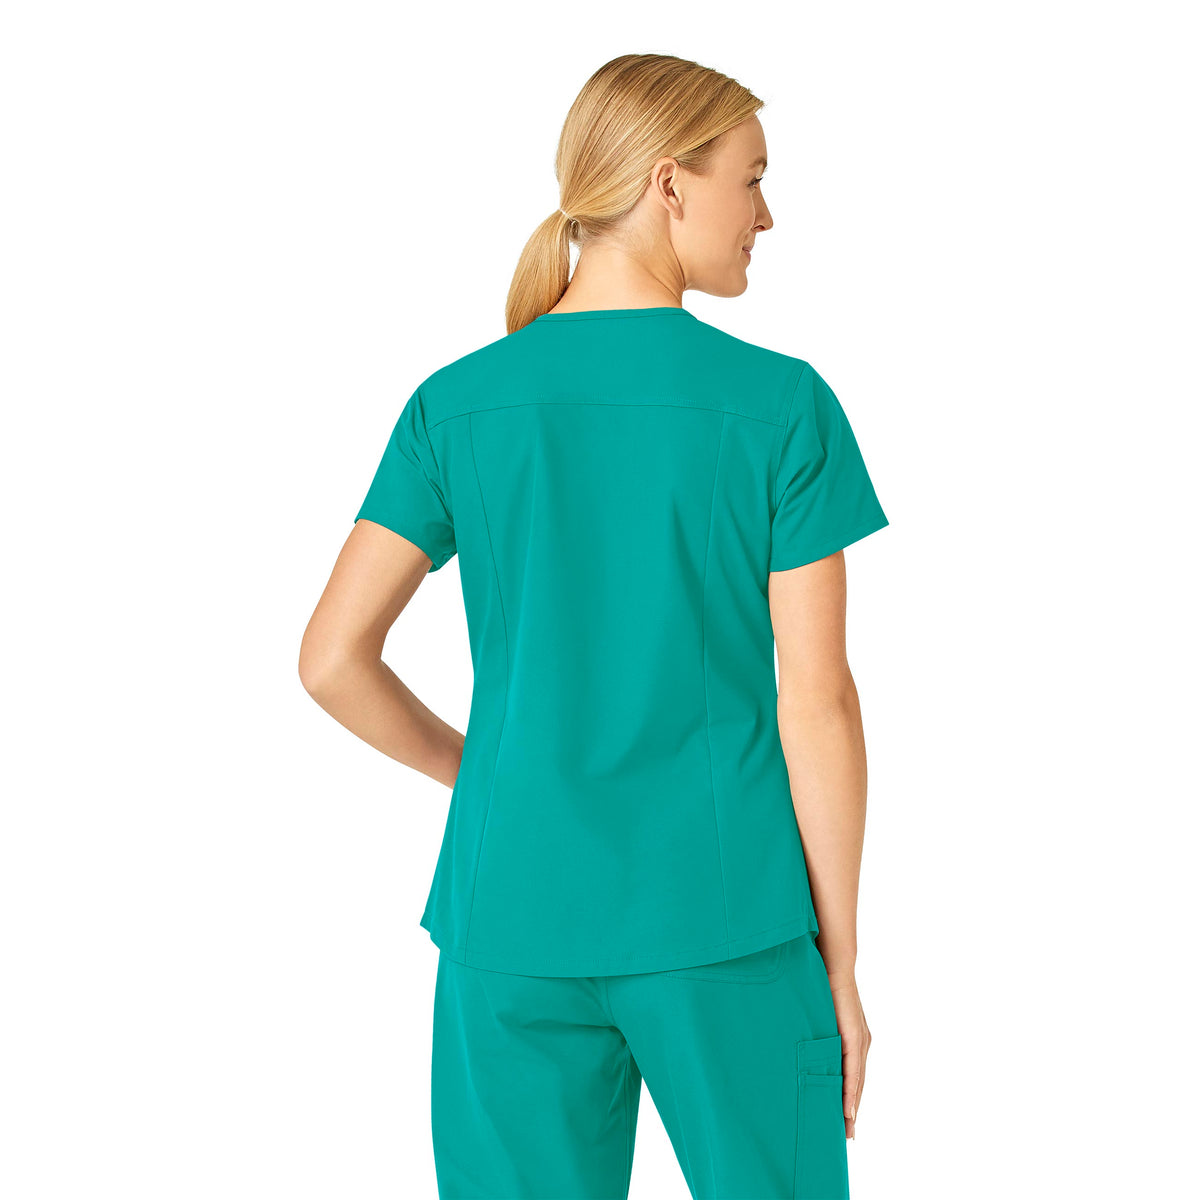 Force Essentials Women's V-Neck Scrub Top Teal Blue back view